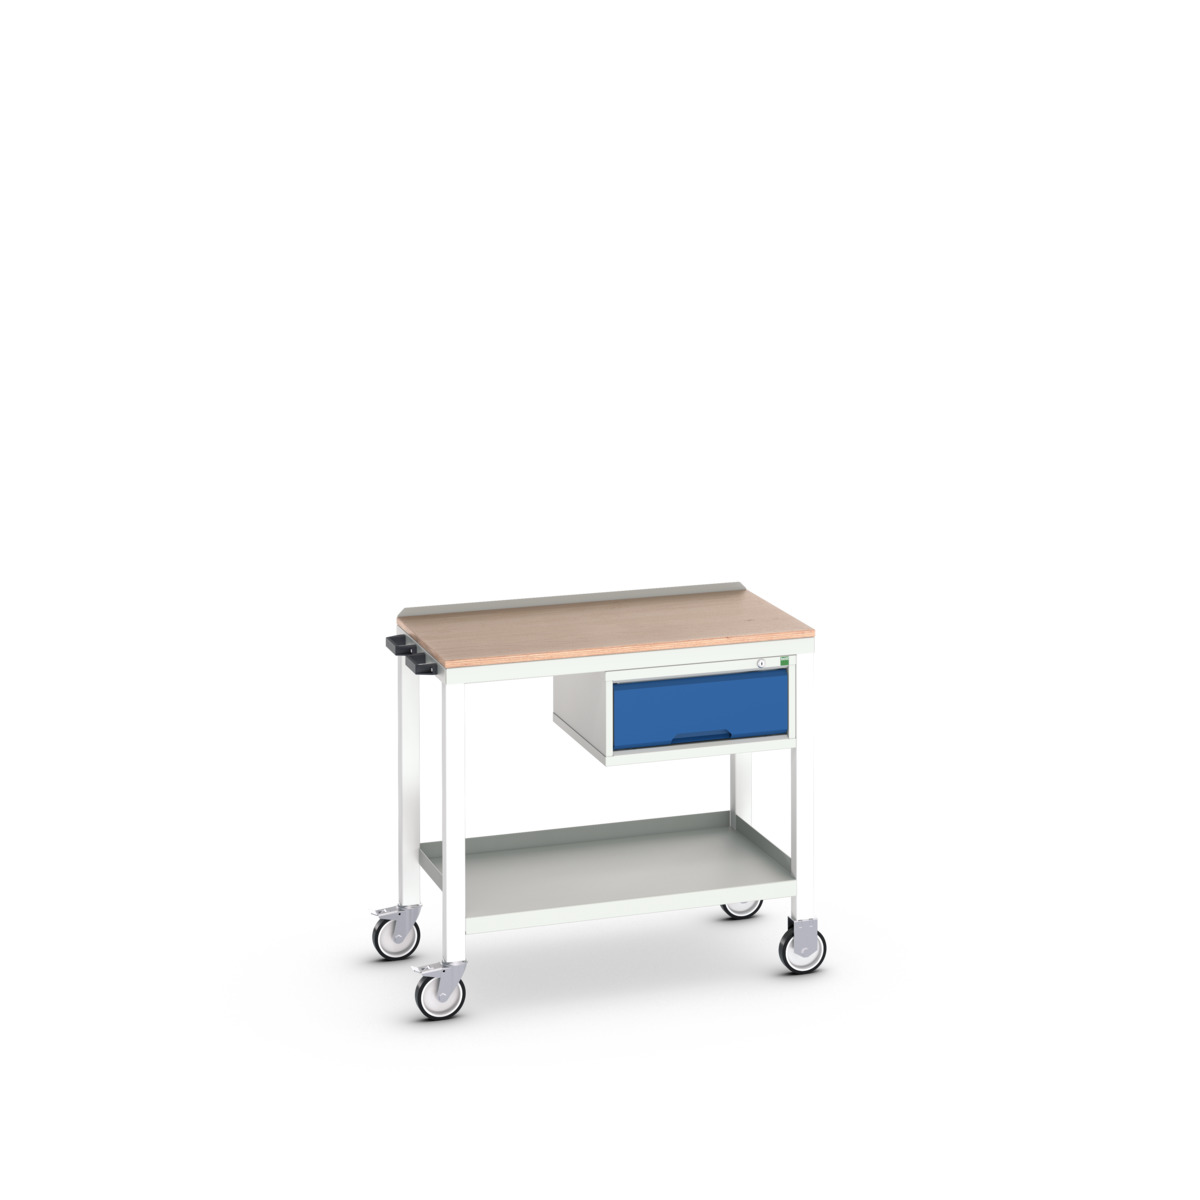 16922801.11 - verso mobile welded bench